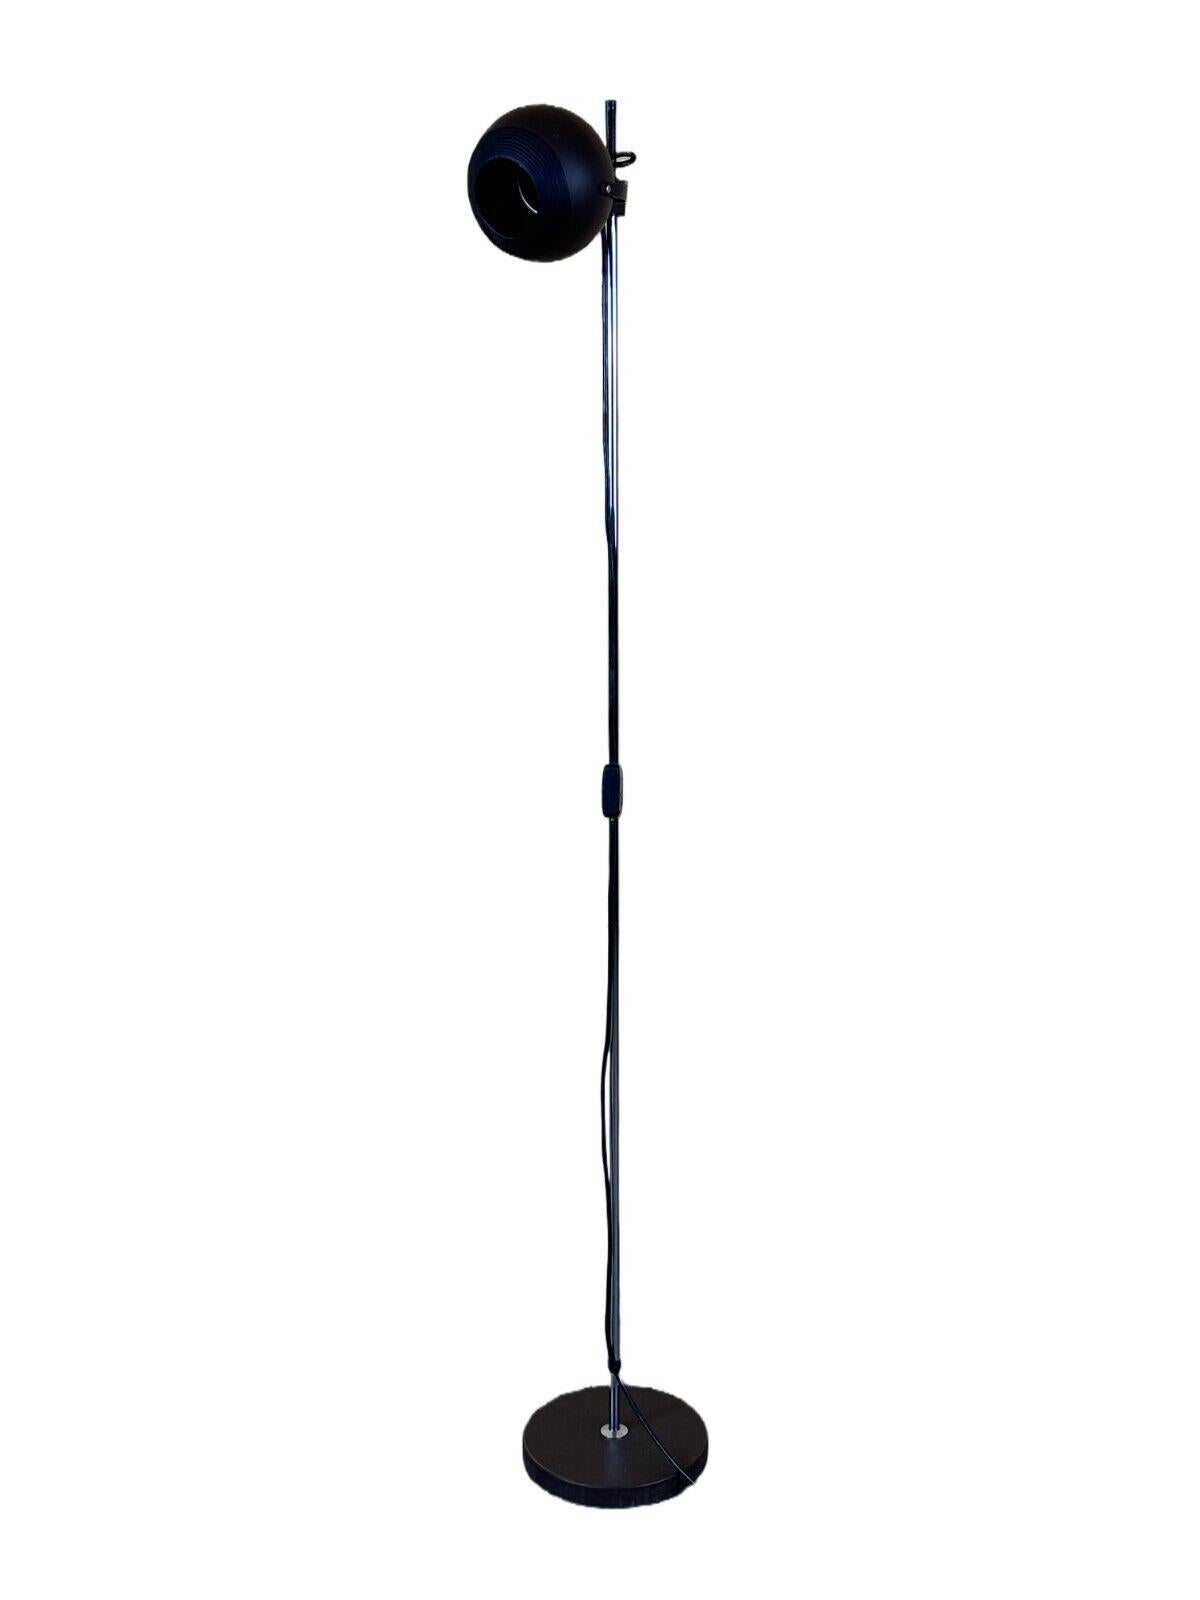 60s 70s floor lamp ball lamp metal Space Age

Object: floor lamp

Manufacturer:

Condition: good - vintage

Age: around 1960-1970

Dimensions:

Width = 33cm
Depth = 22cm
Height = 151cm

Material: metal, plastic

Other notes:

E27 socket

The